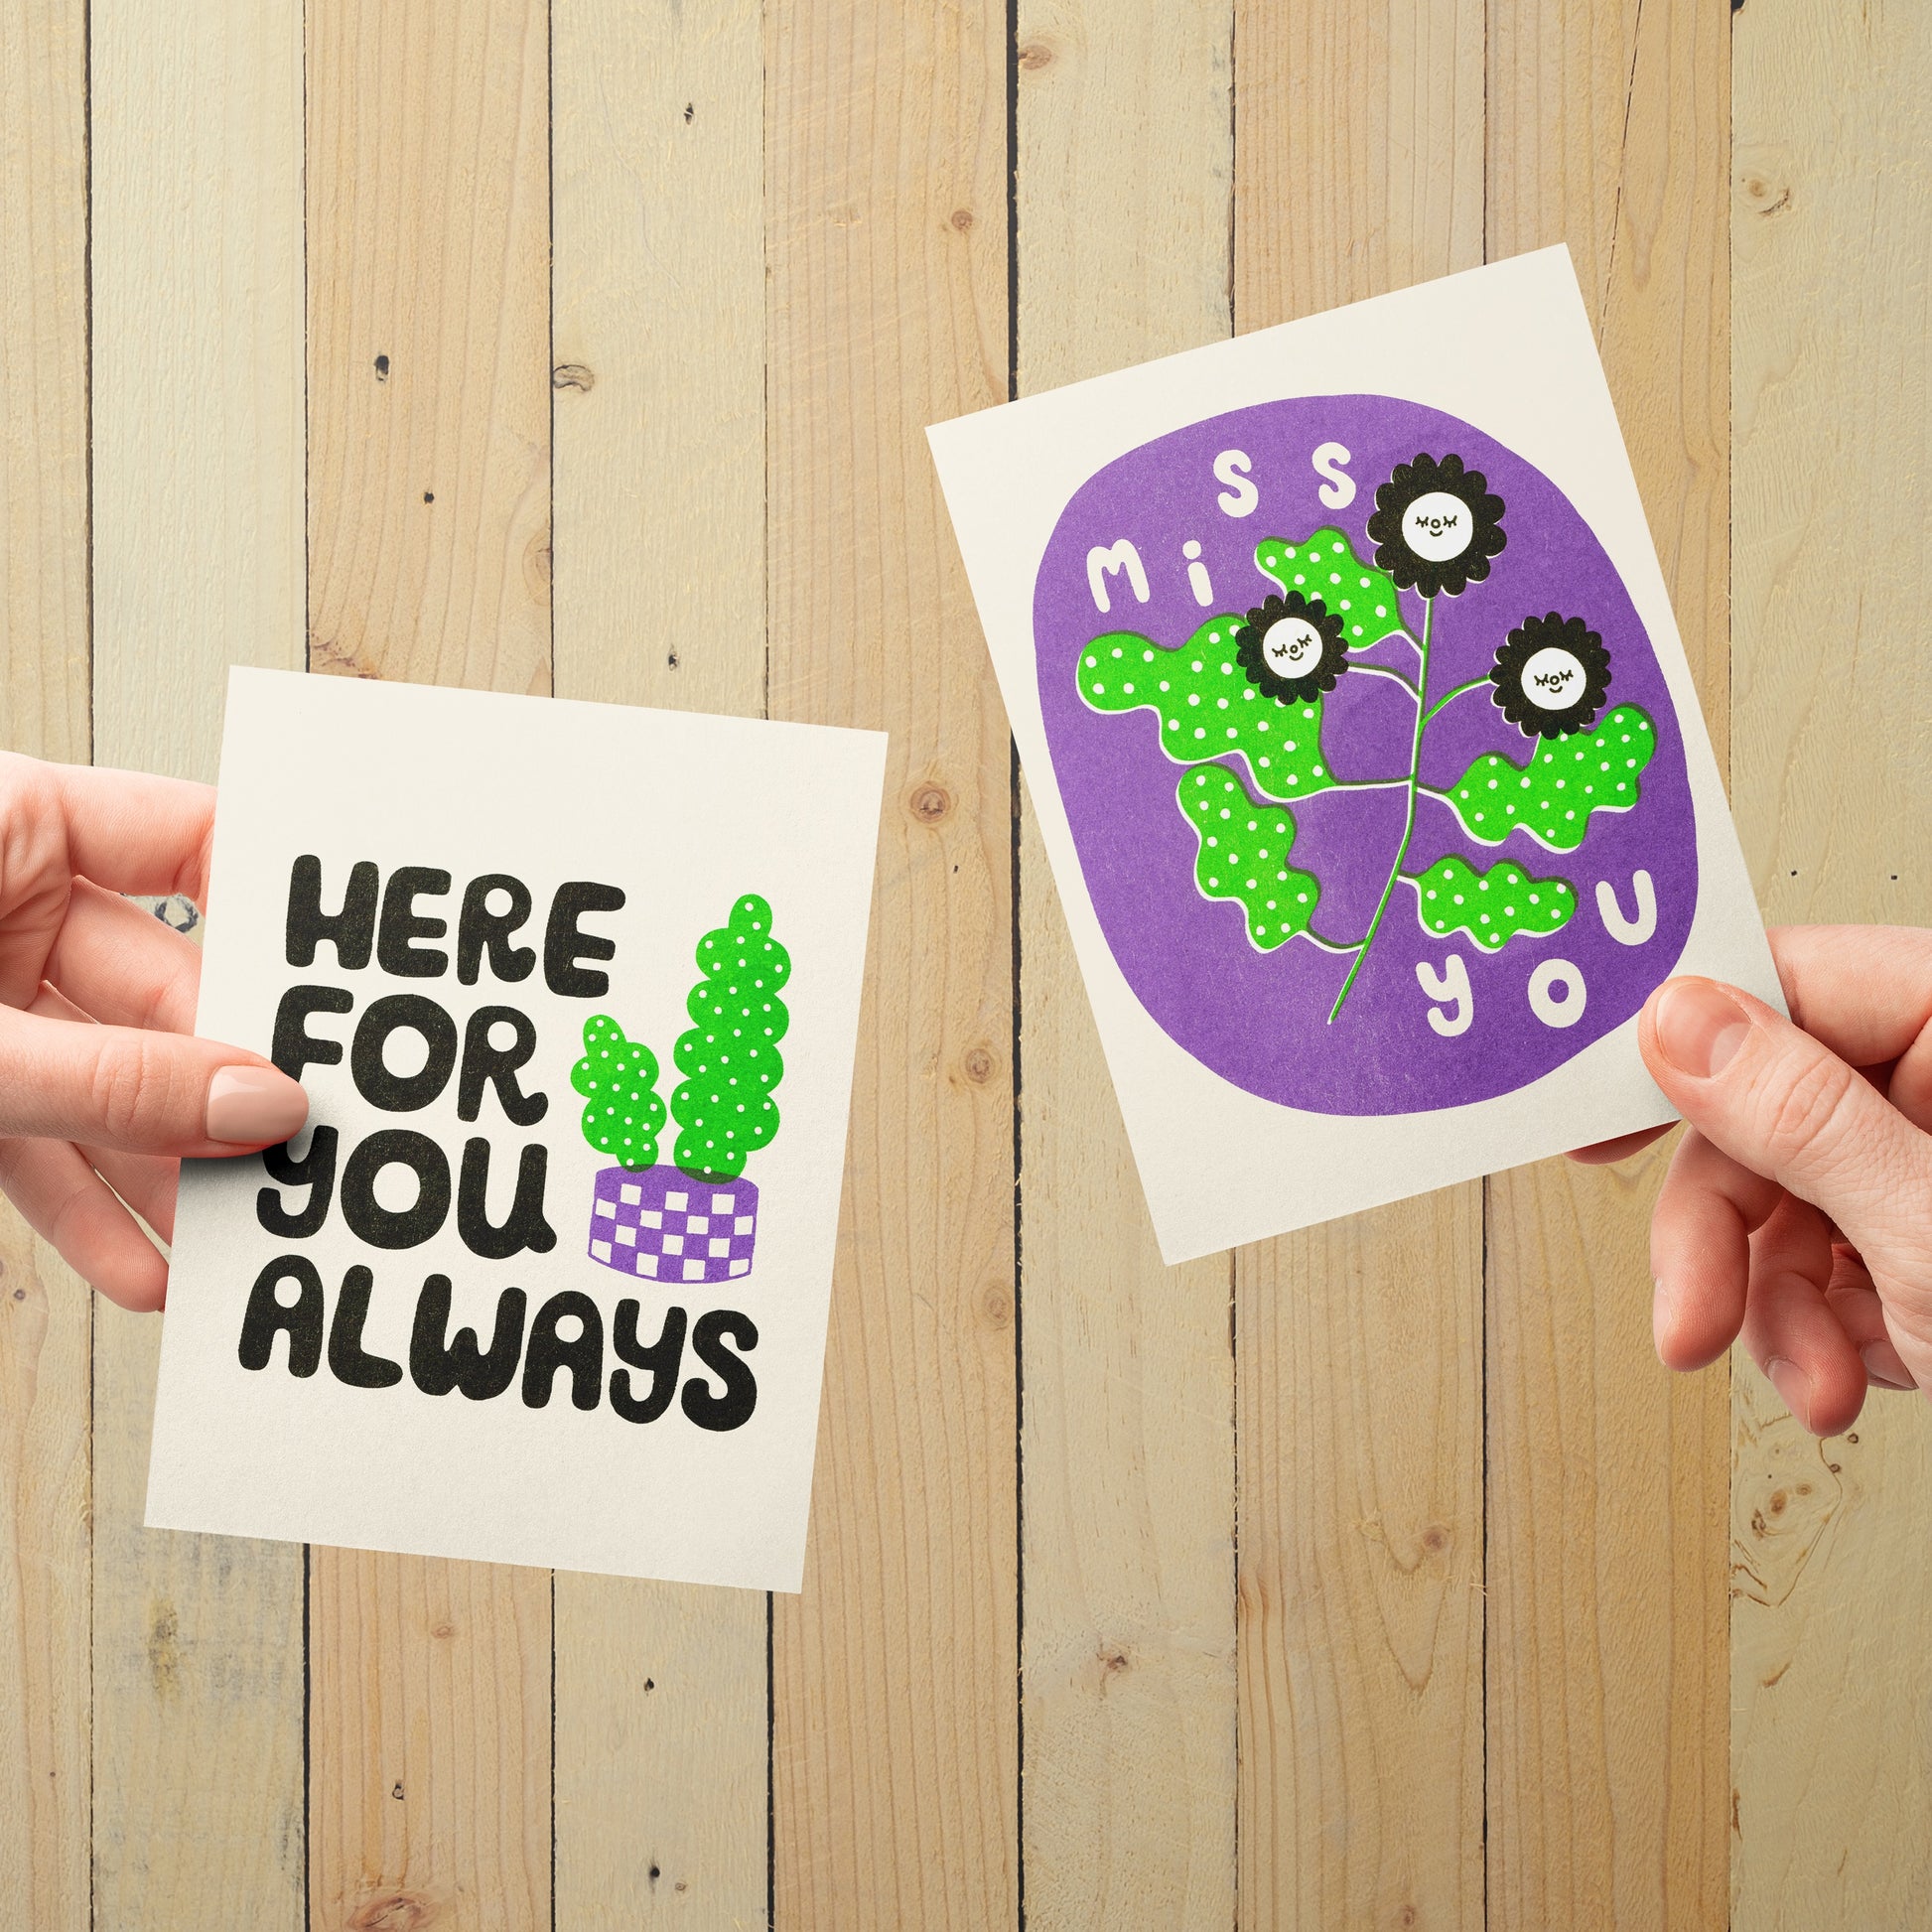 Two hands holding up risograph printed greeting cards, in front of a light wood panel background.